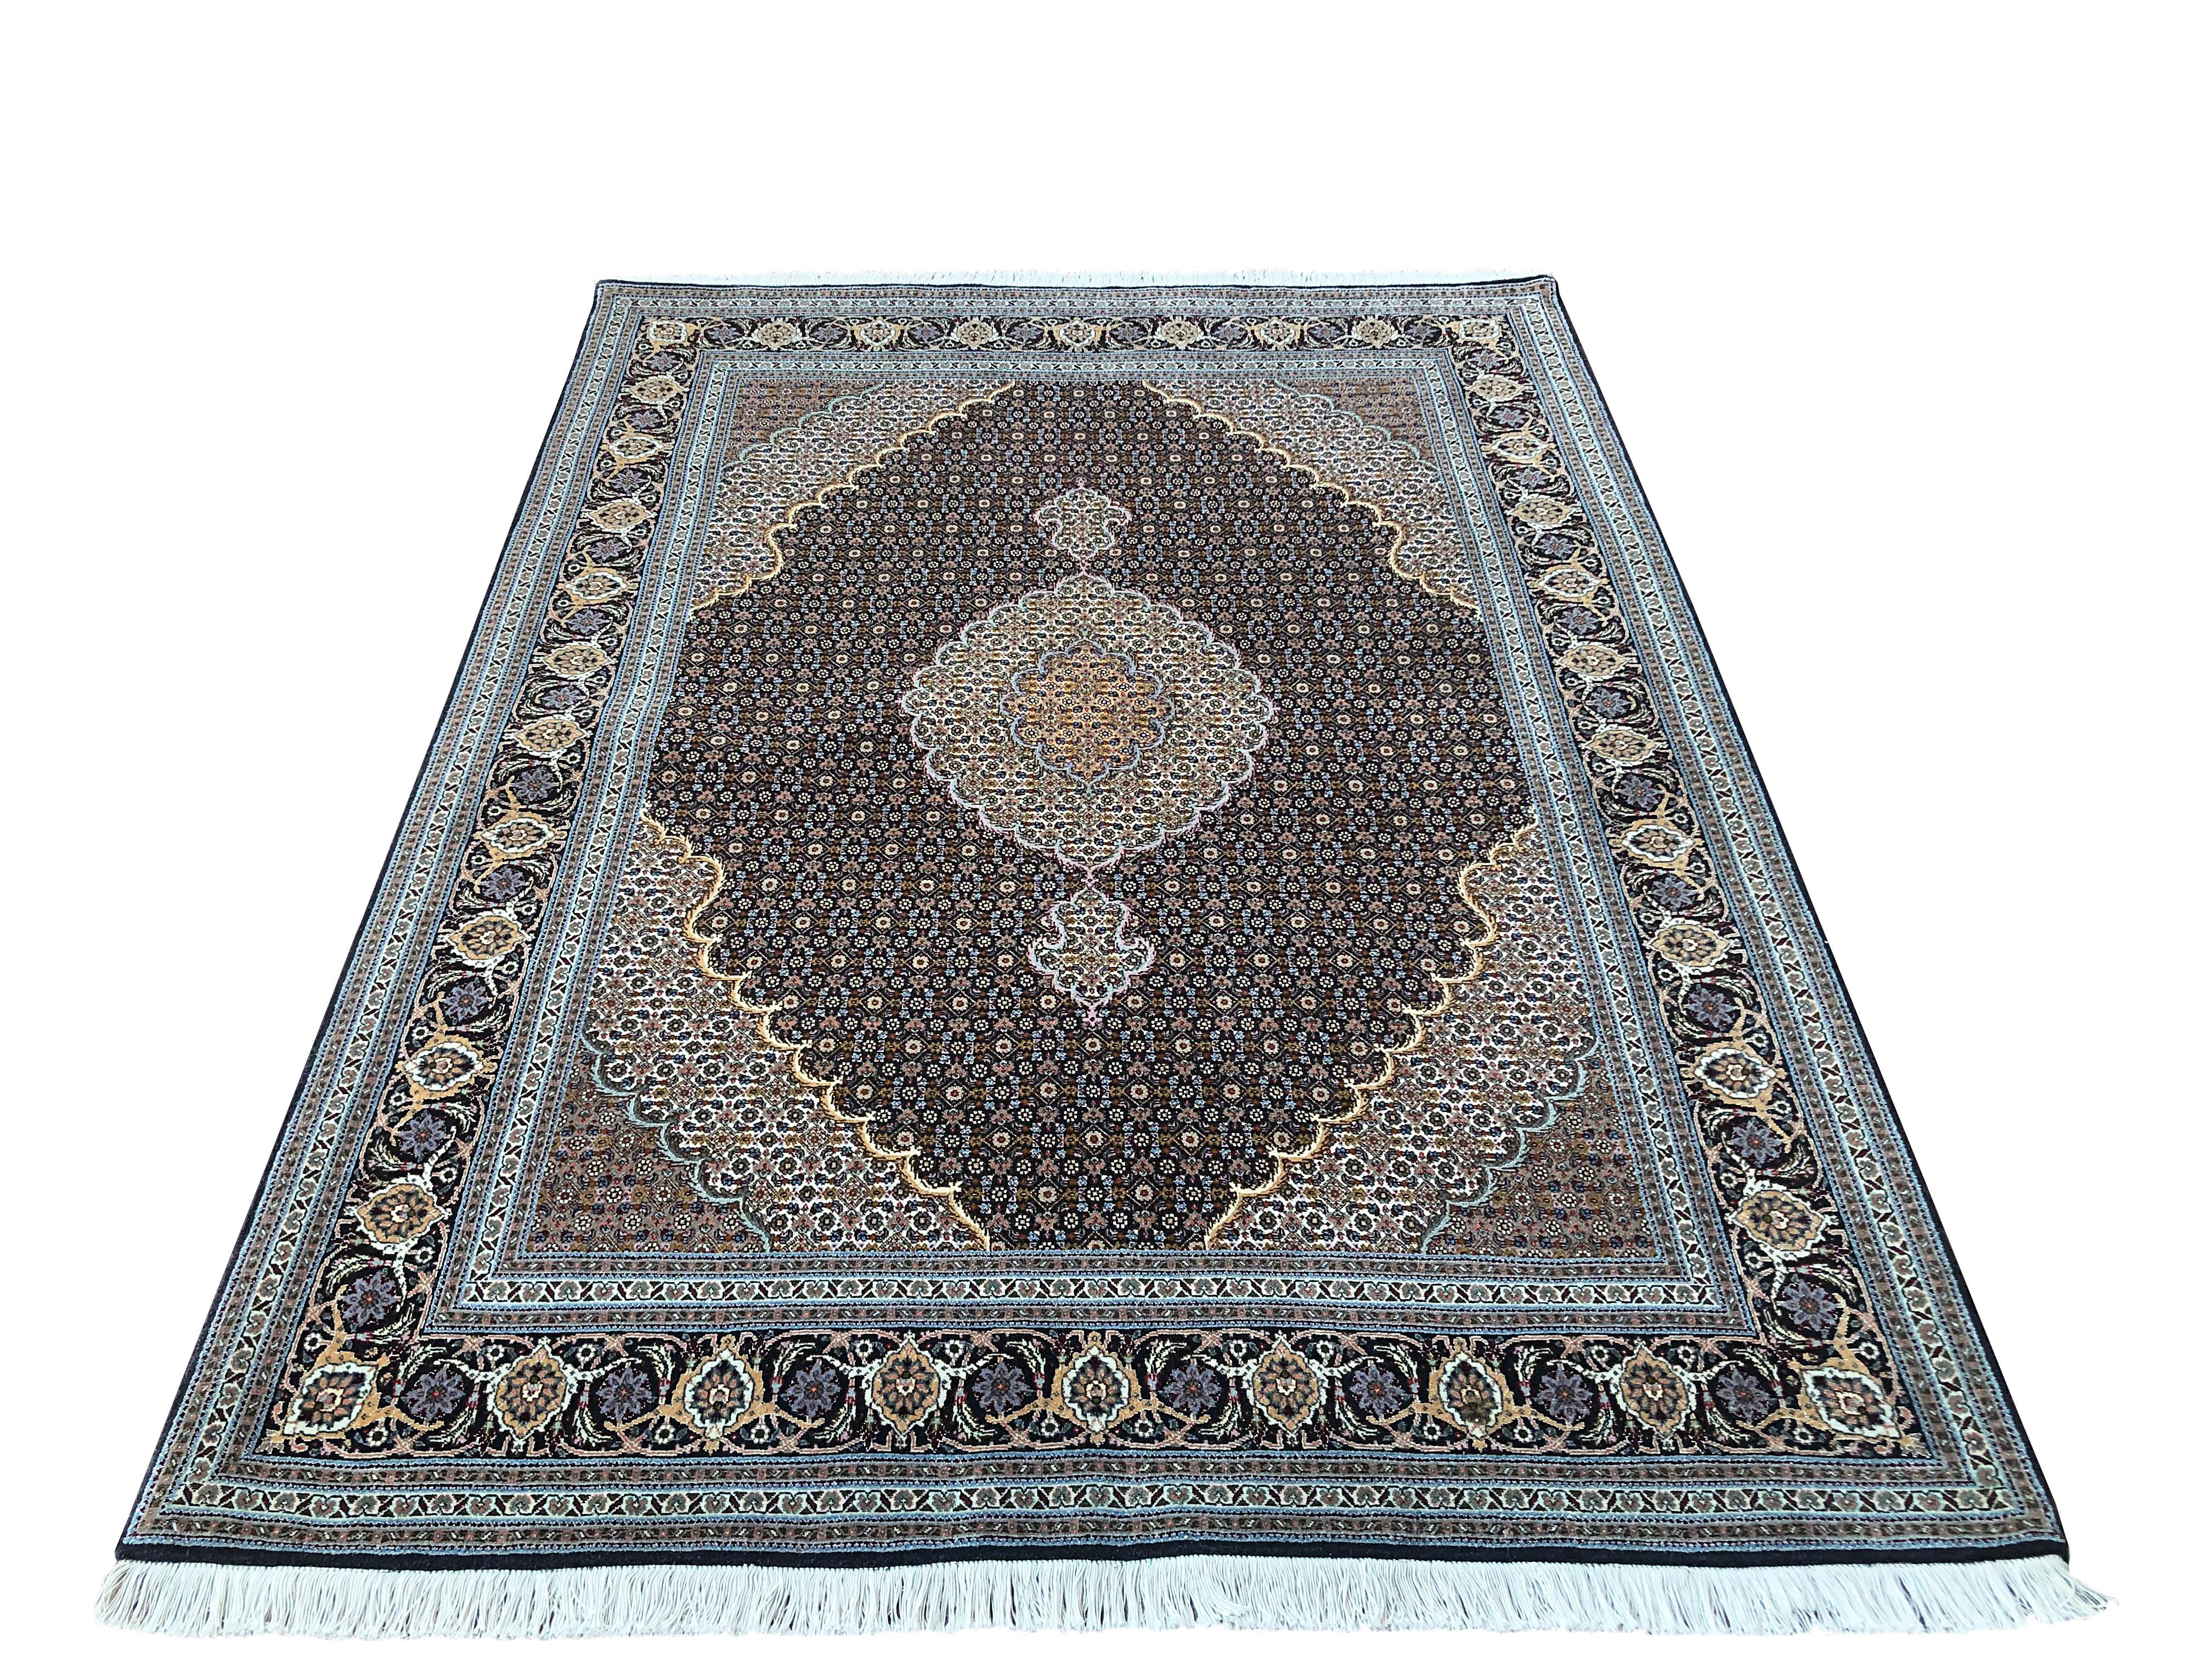 Tabriz rugs are well known for their excellent weaving and design. One of the very famous patterns of Tabriz rugs are fish design known is Mahi. This beautiful piece has wool and silk pile with cotton foundation. This is an 2000s fine 50 “RAJ”